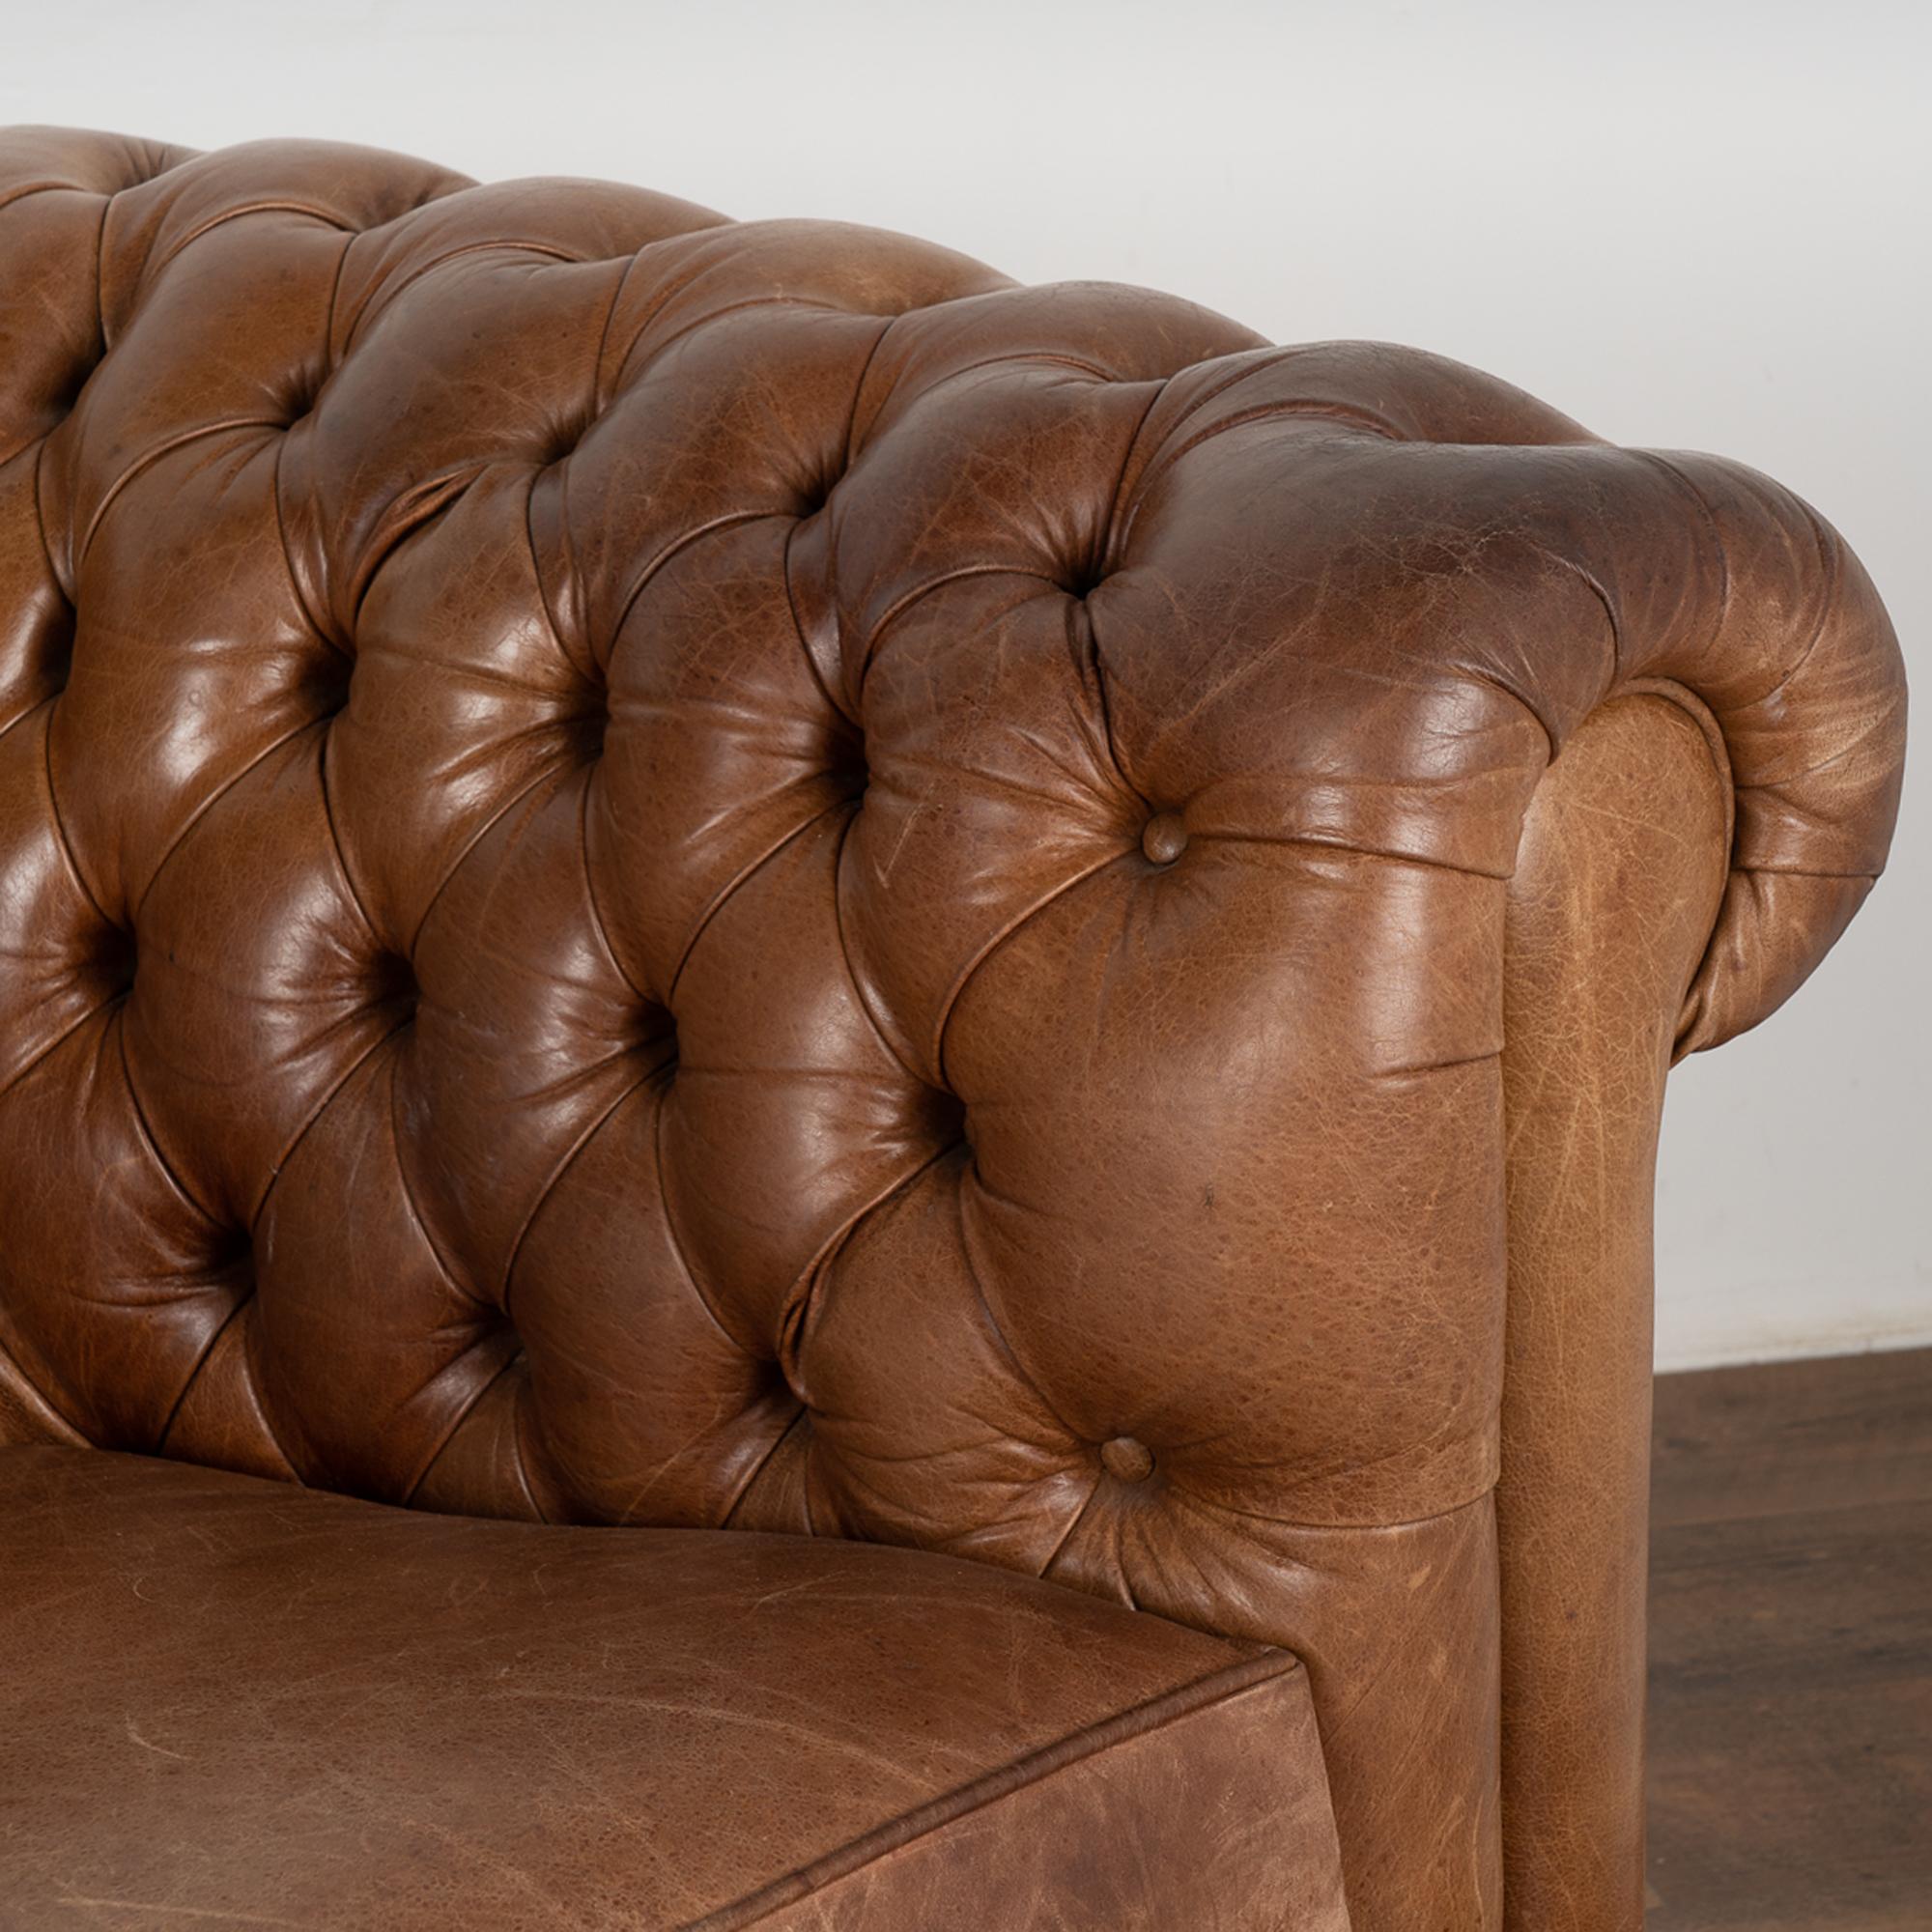 Vintage Brown Leather Three Seat Chesterfield Sofa, Denmark circa 1960-70 For Sale 1